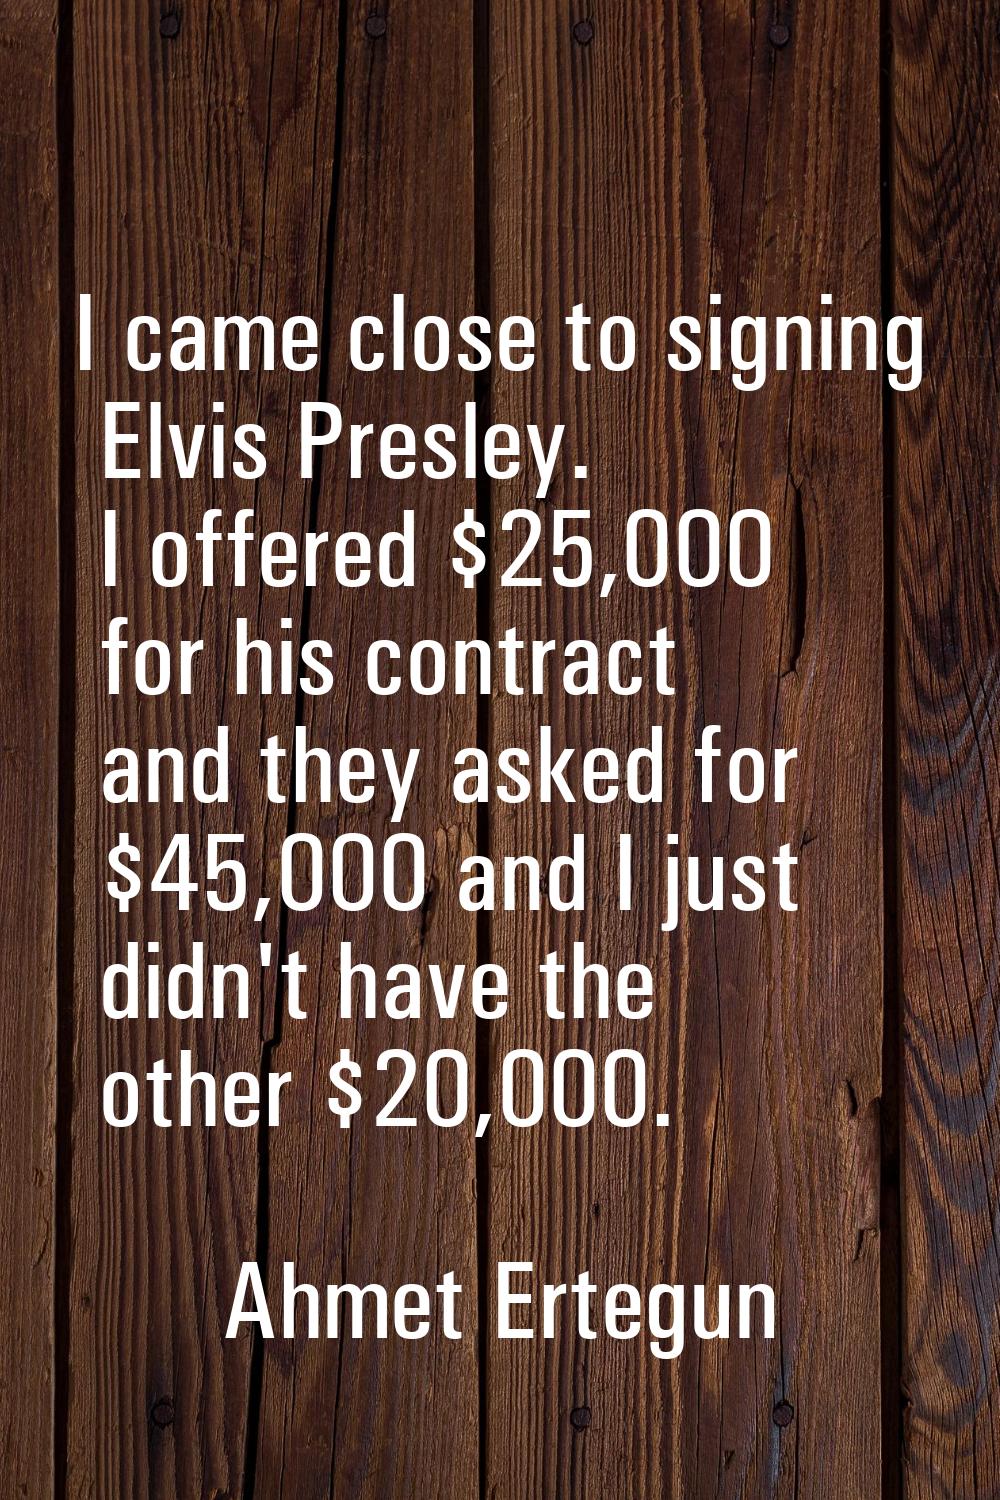 I came close to signing Elvis Presley. I offered $25,000 for his contract and they asked for $45,00